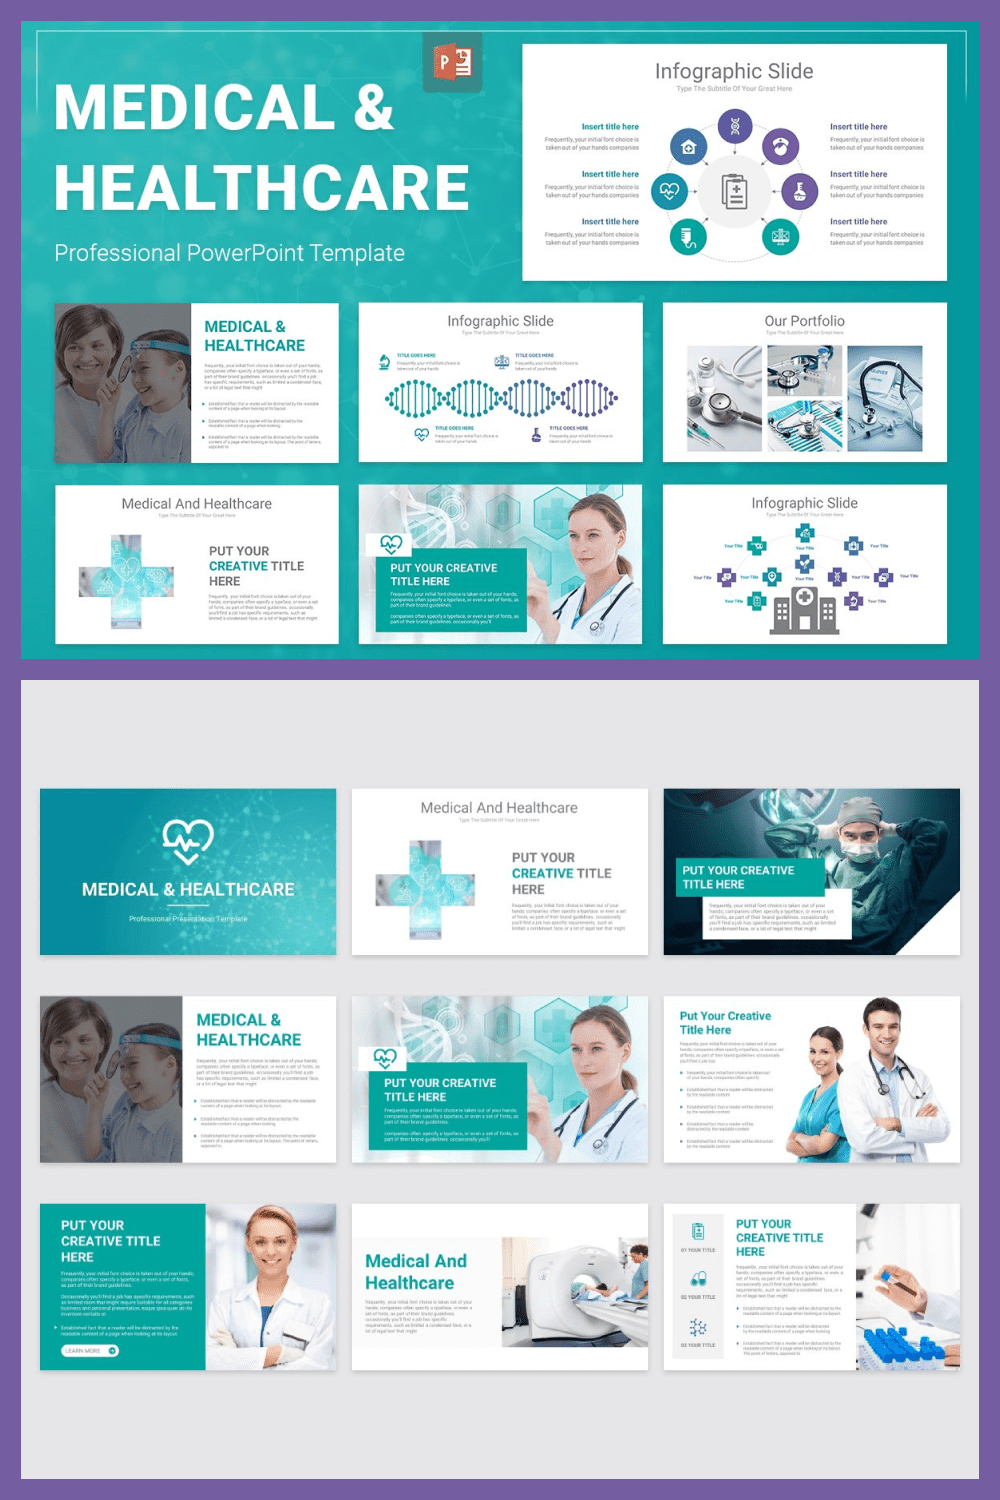 Medical and healthcare powerpoint template.